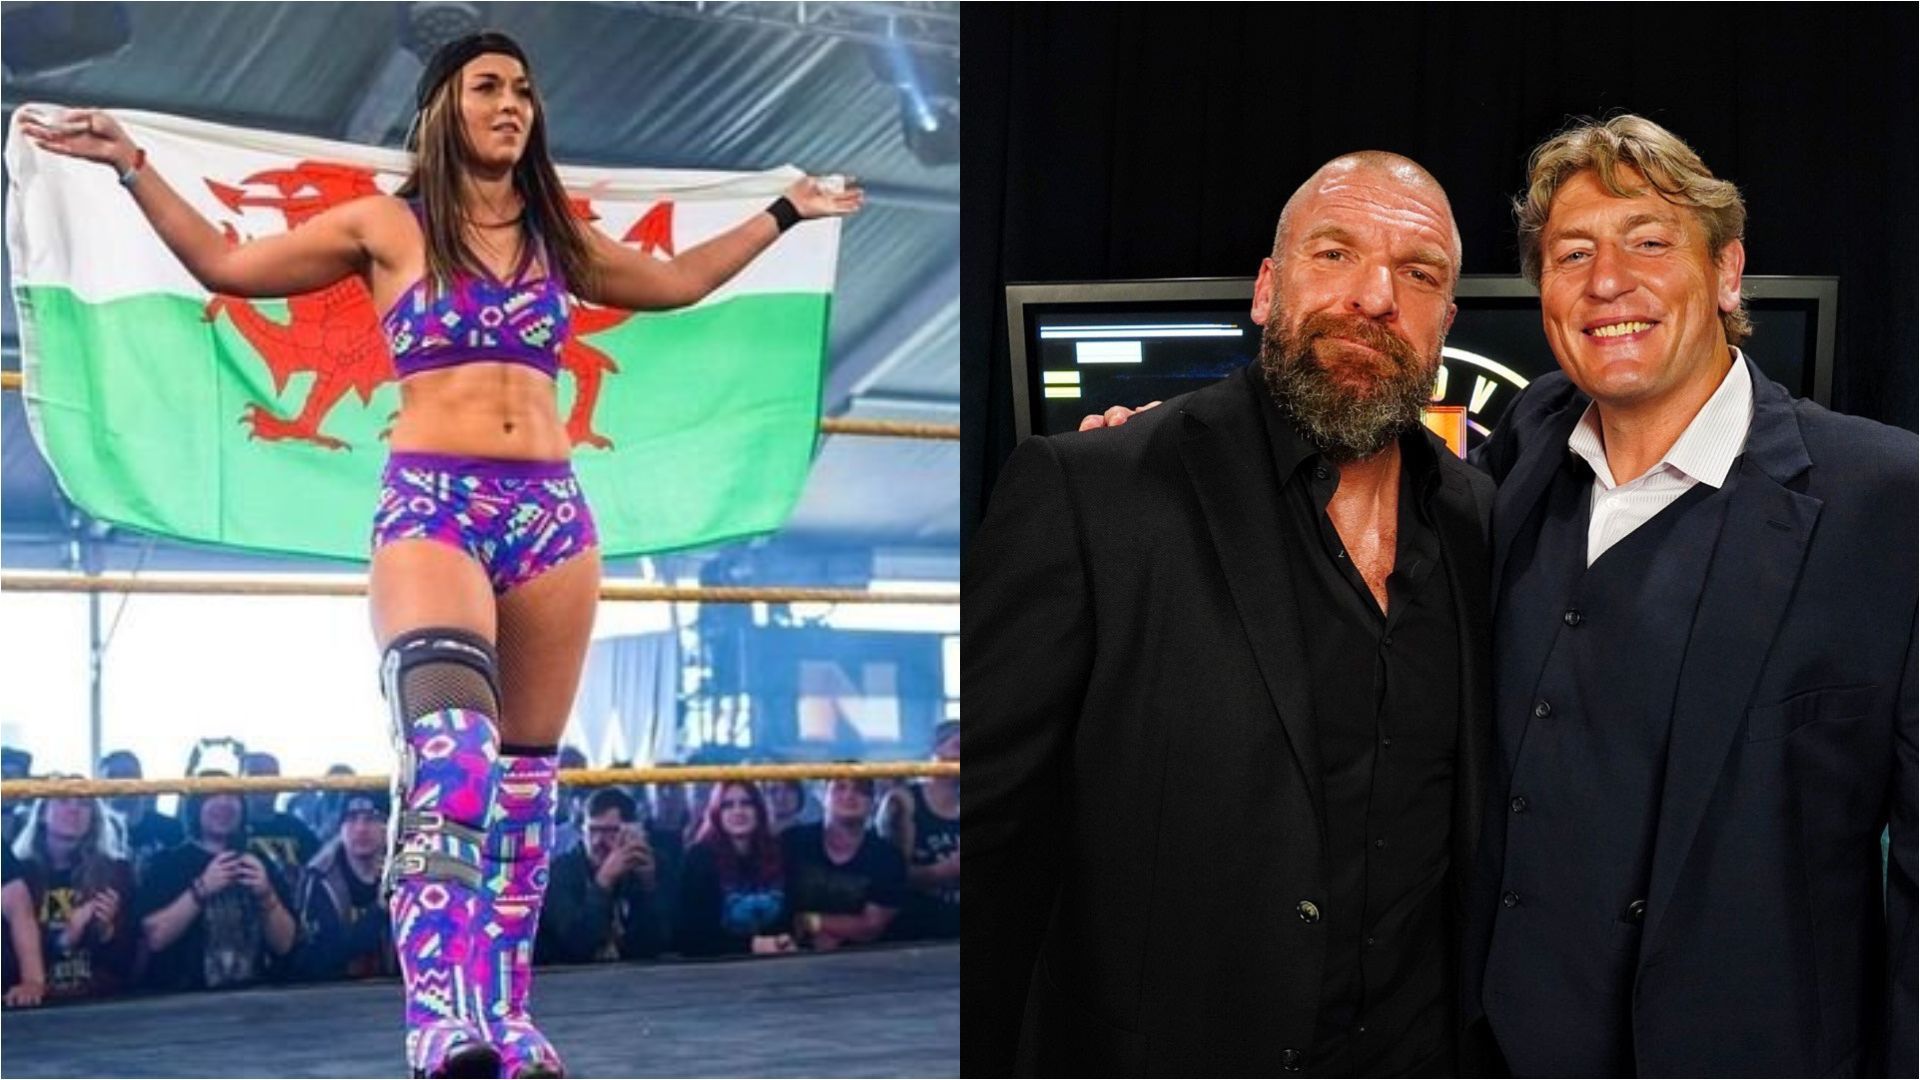 William Regal and Tegan Nox would be welcome additions to Clash at the Castle